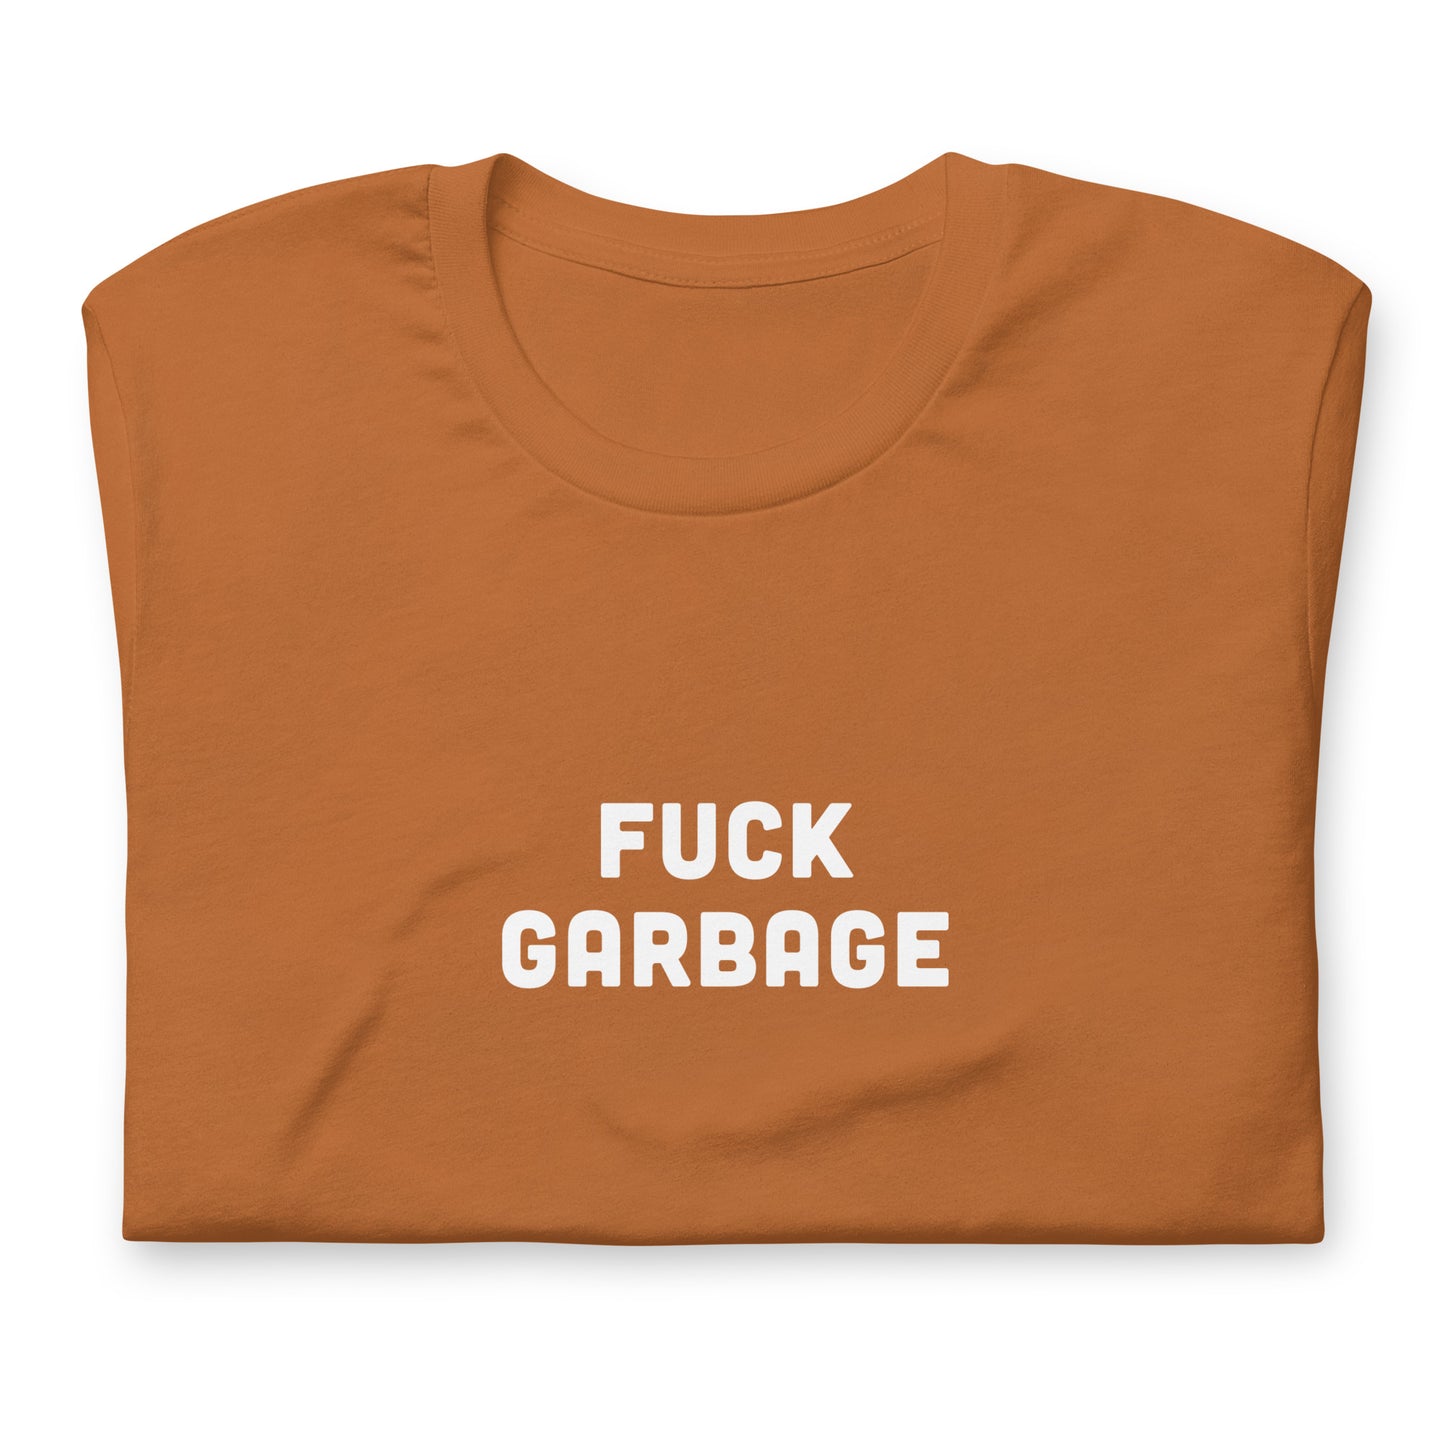 Fuck Garbage T-Shirt Size L Color Navy